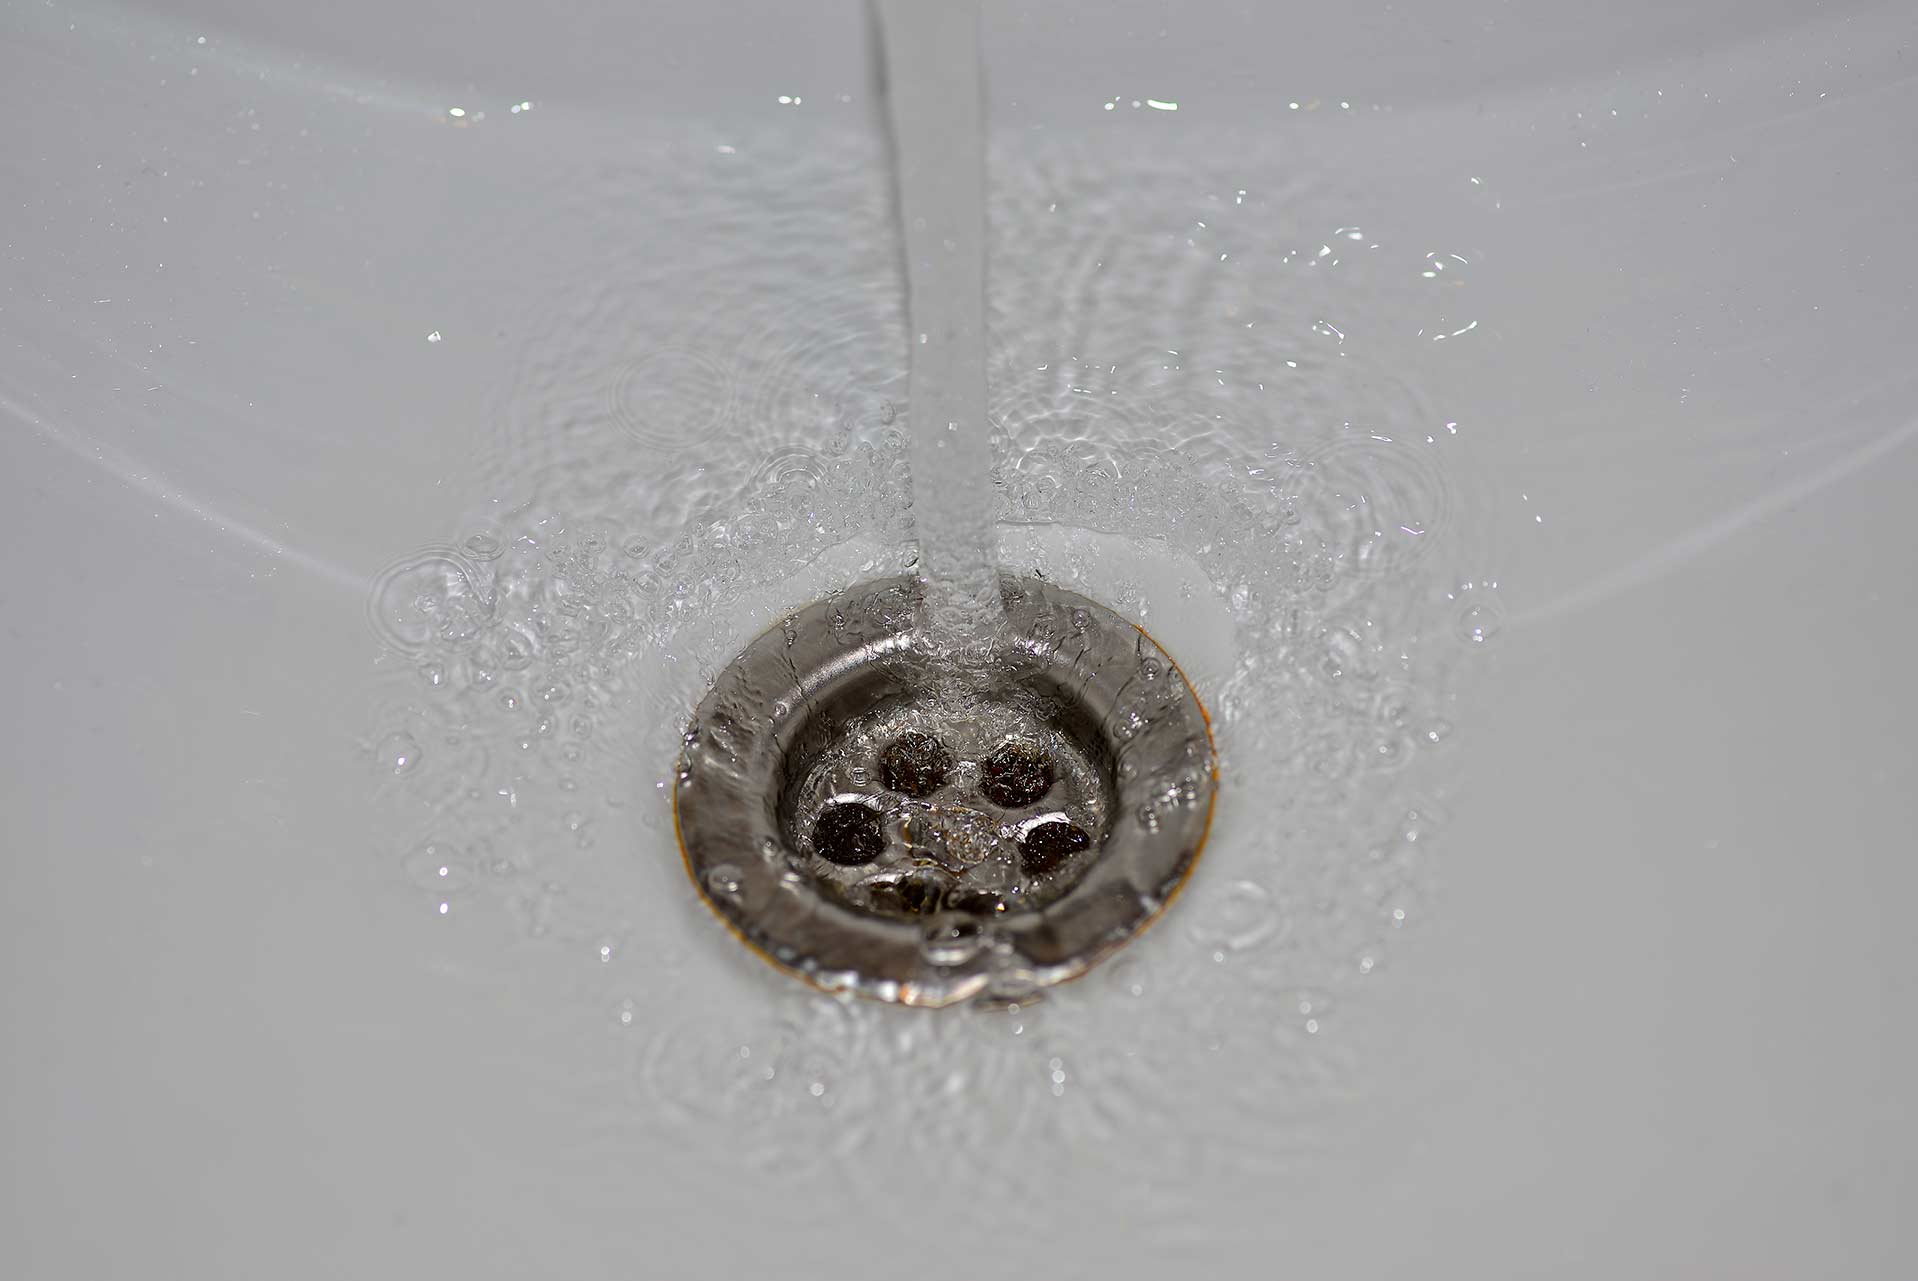 A2B Drains provides services to unblock blocked sinks and drains for properties in Locksbottom.